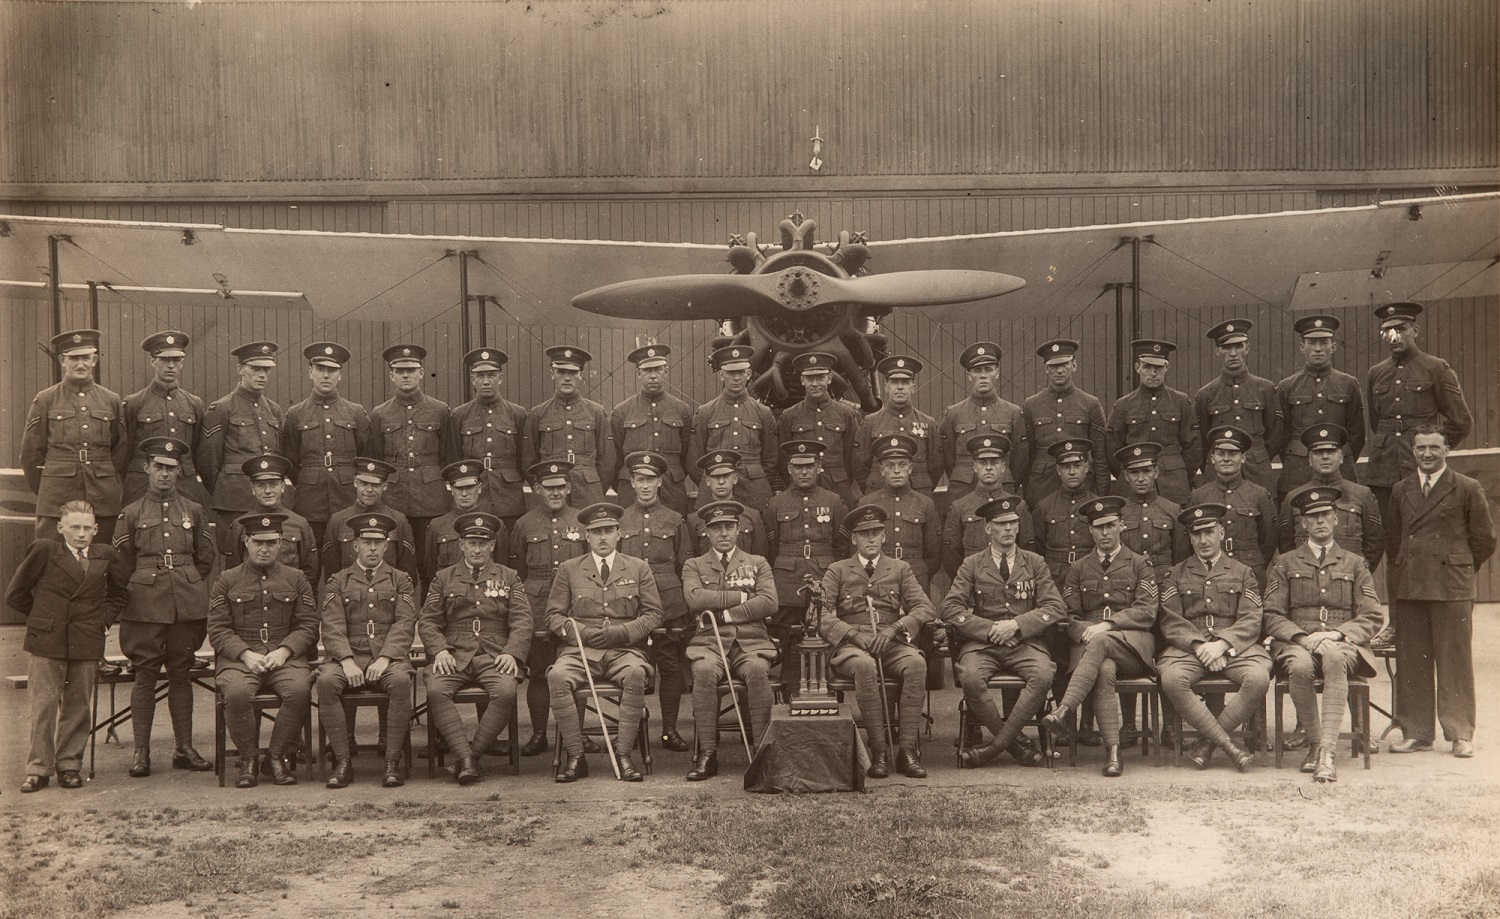 No 605 Squadron, possibly after winning the 'Eaker' Trophy in 1931